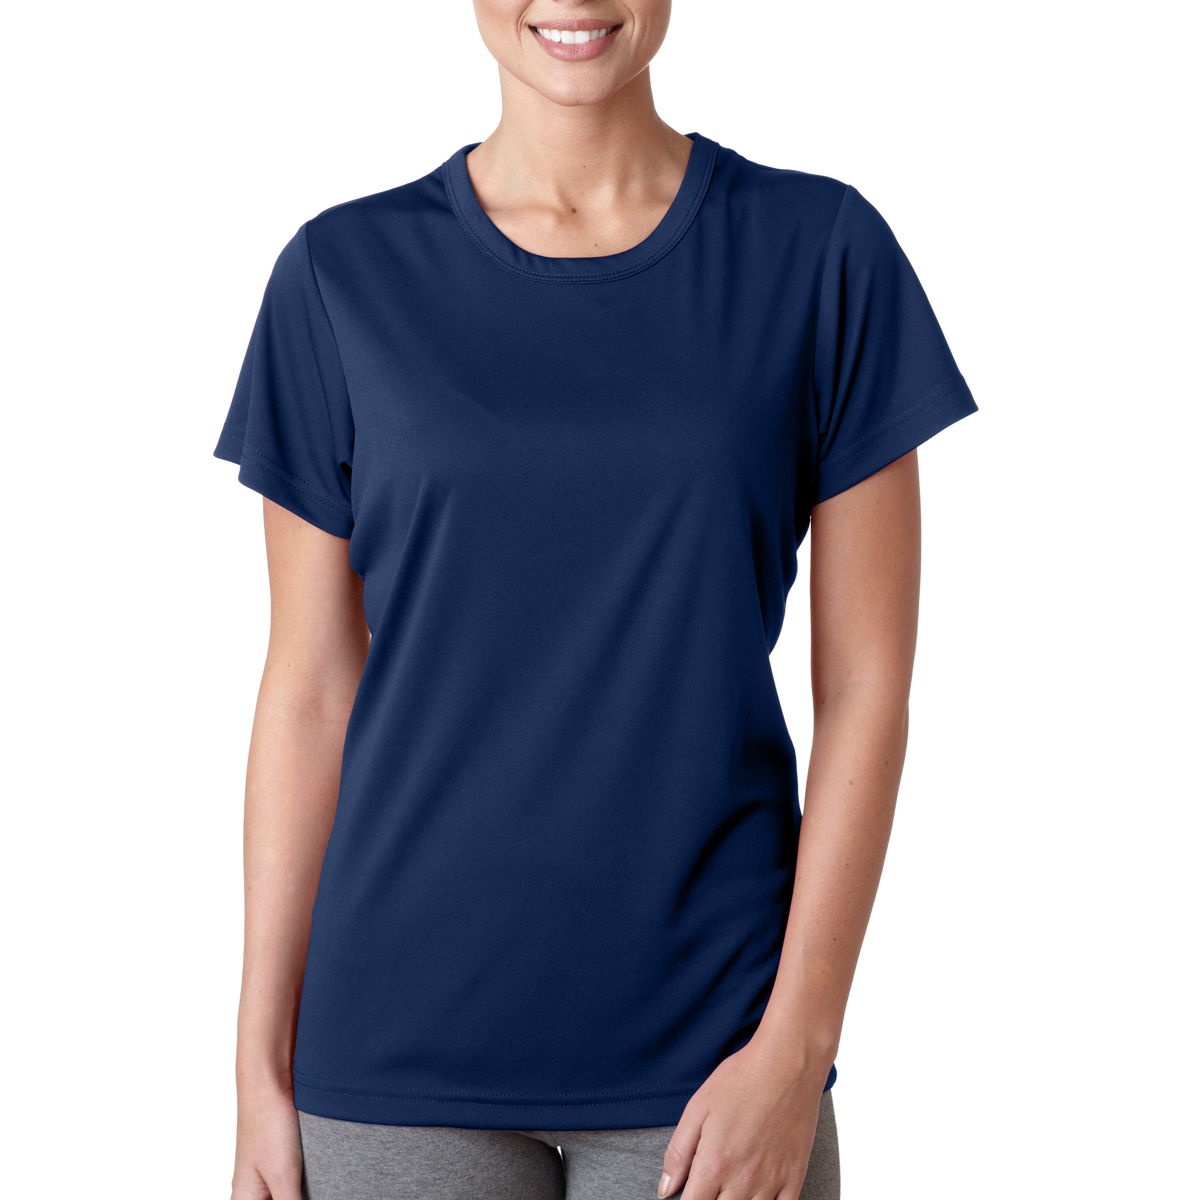 Navy colored UltraClub 8420W Ladies' Cool & Dry Sport Performance ...